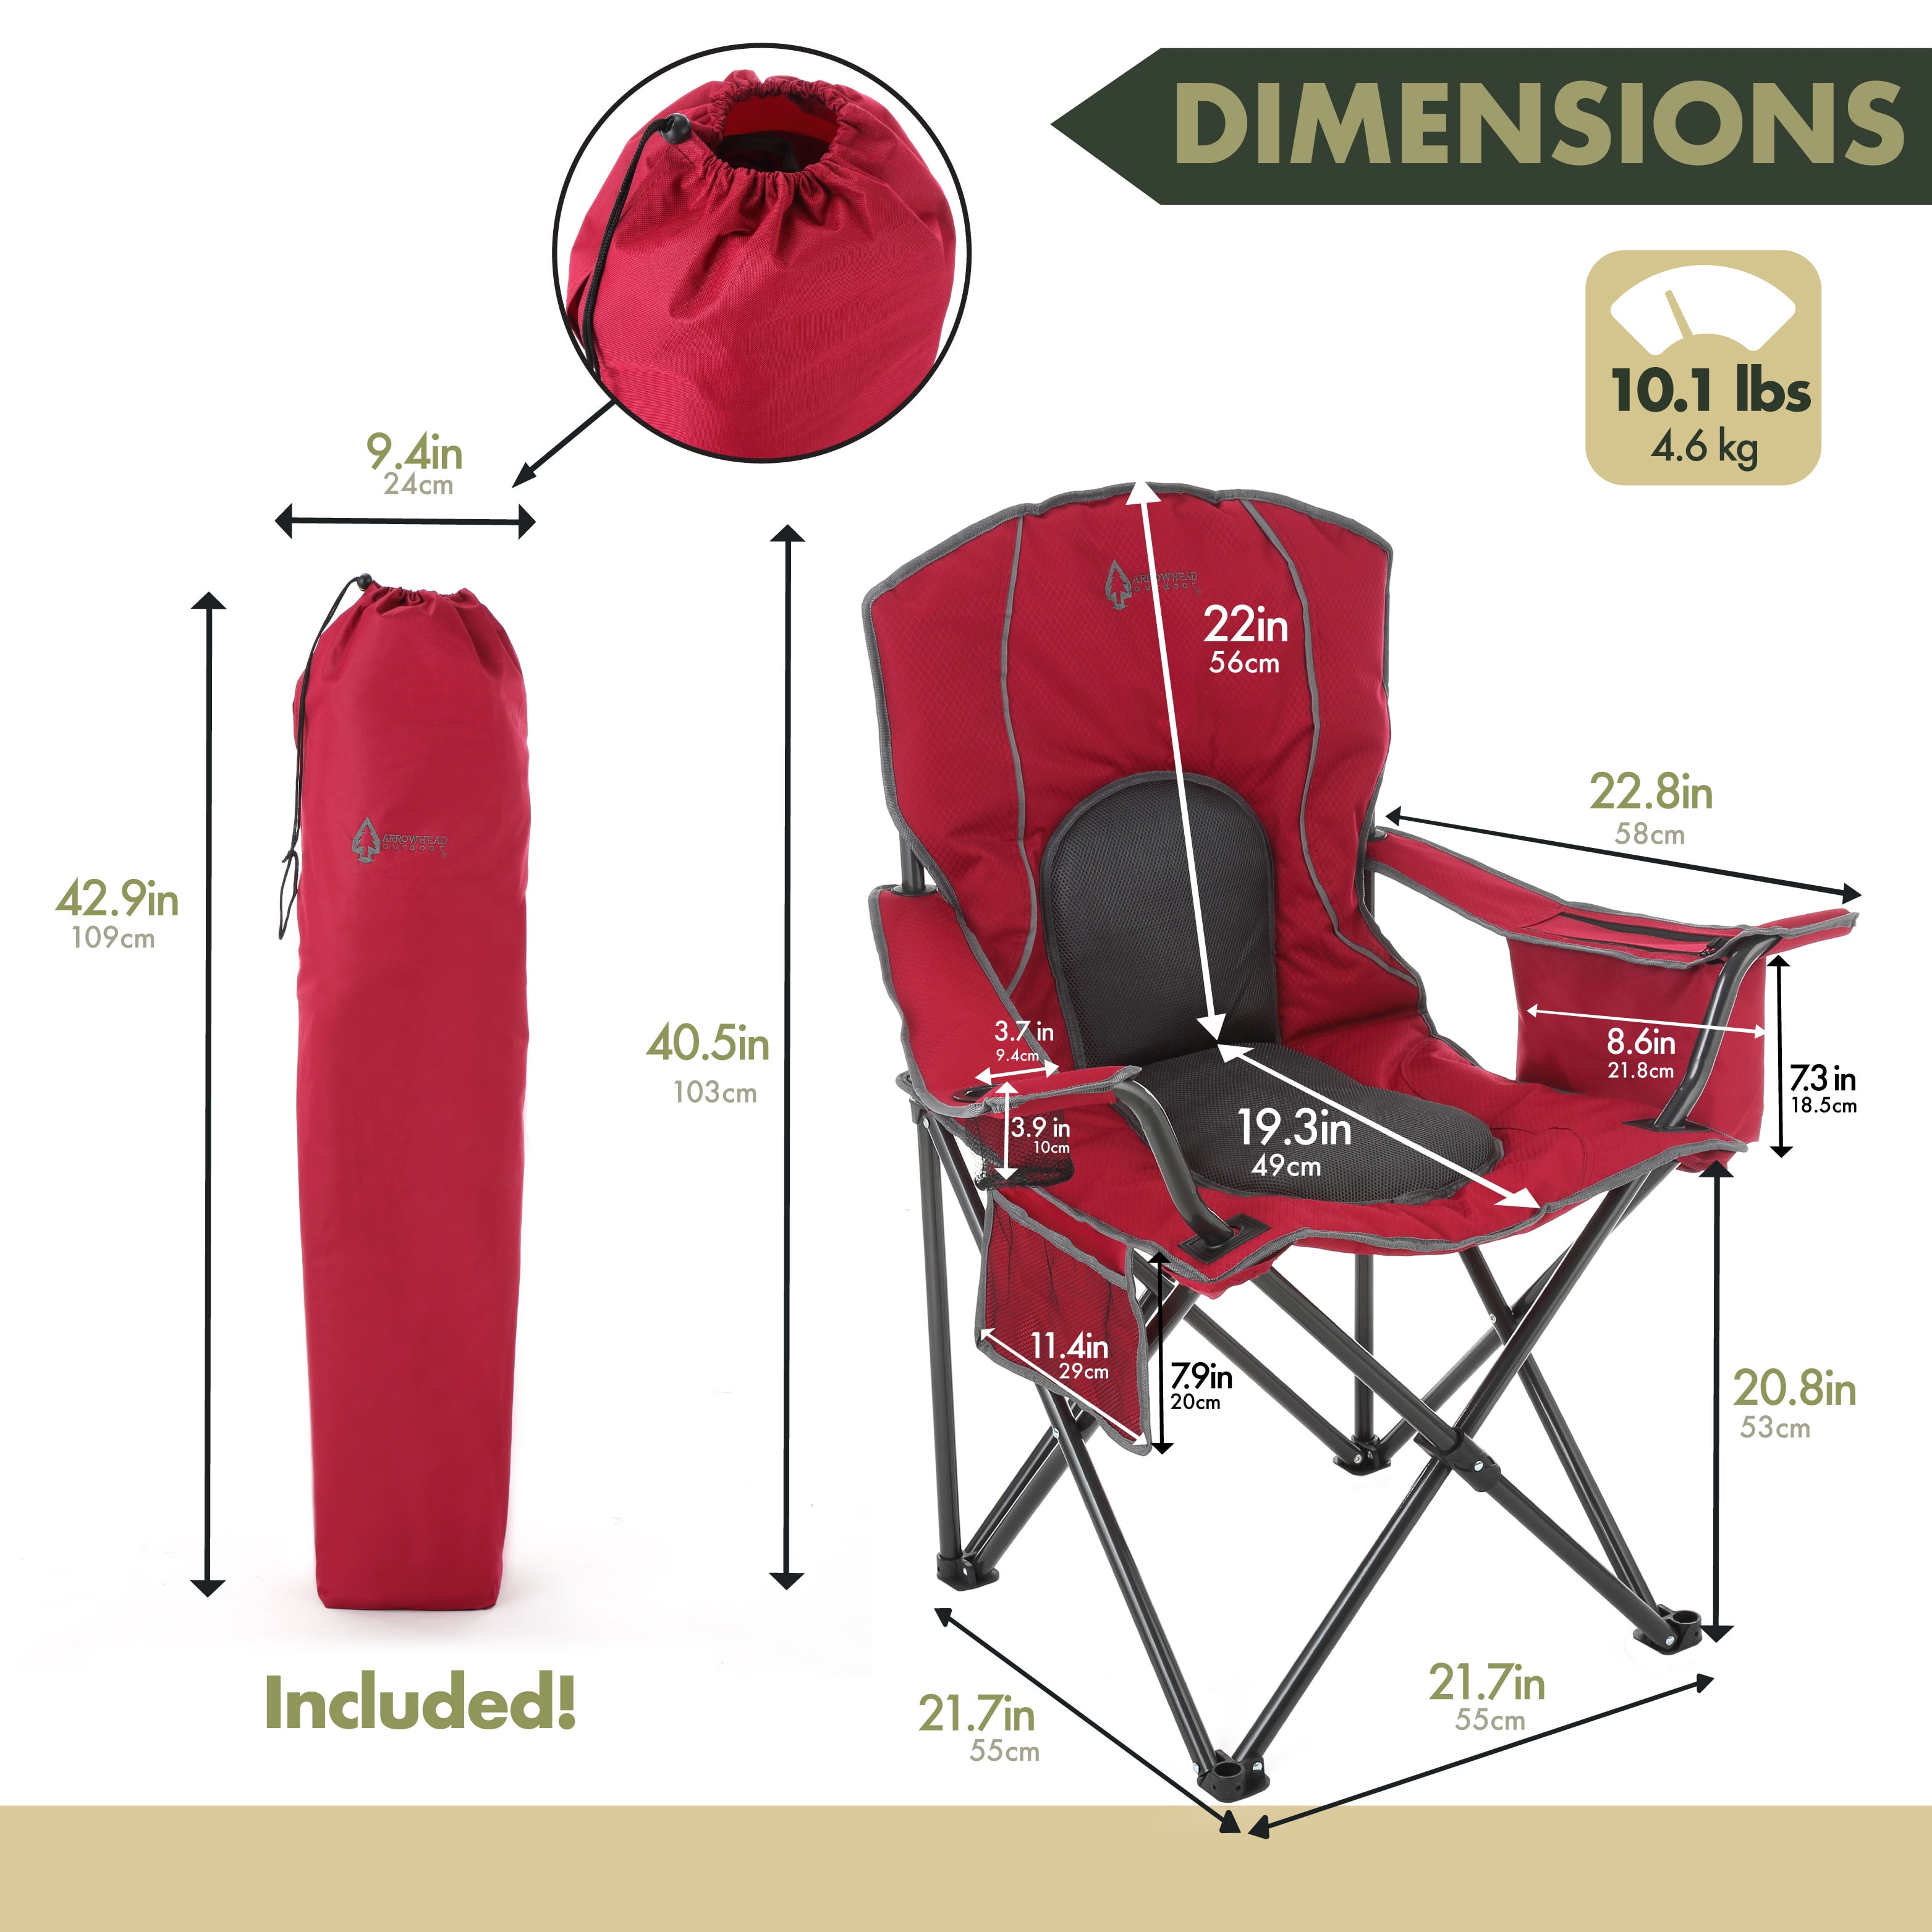 ARROWHEAD OUTDOOR Portable Folding Camping Quad Chair w/ 4-Can Cooler, Cup- Holder, Heavy-Duty Carrying Bag w/ Easy Carry Shoulder Strap, Padded  Armrests, Supports up to 330lbs, USA-Based Support (Tan) 